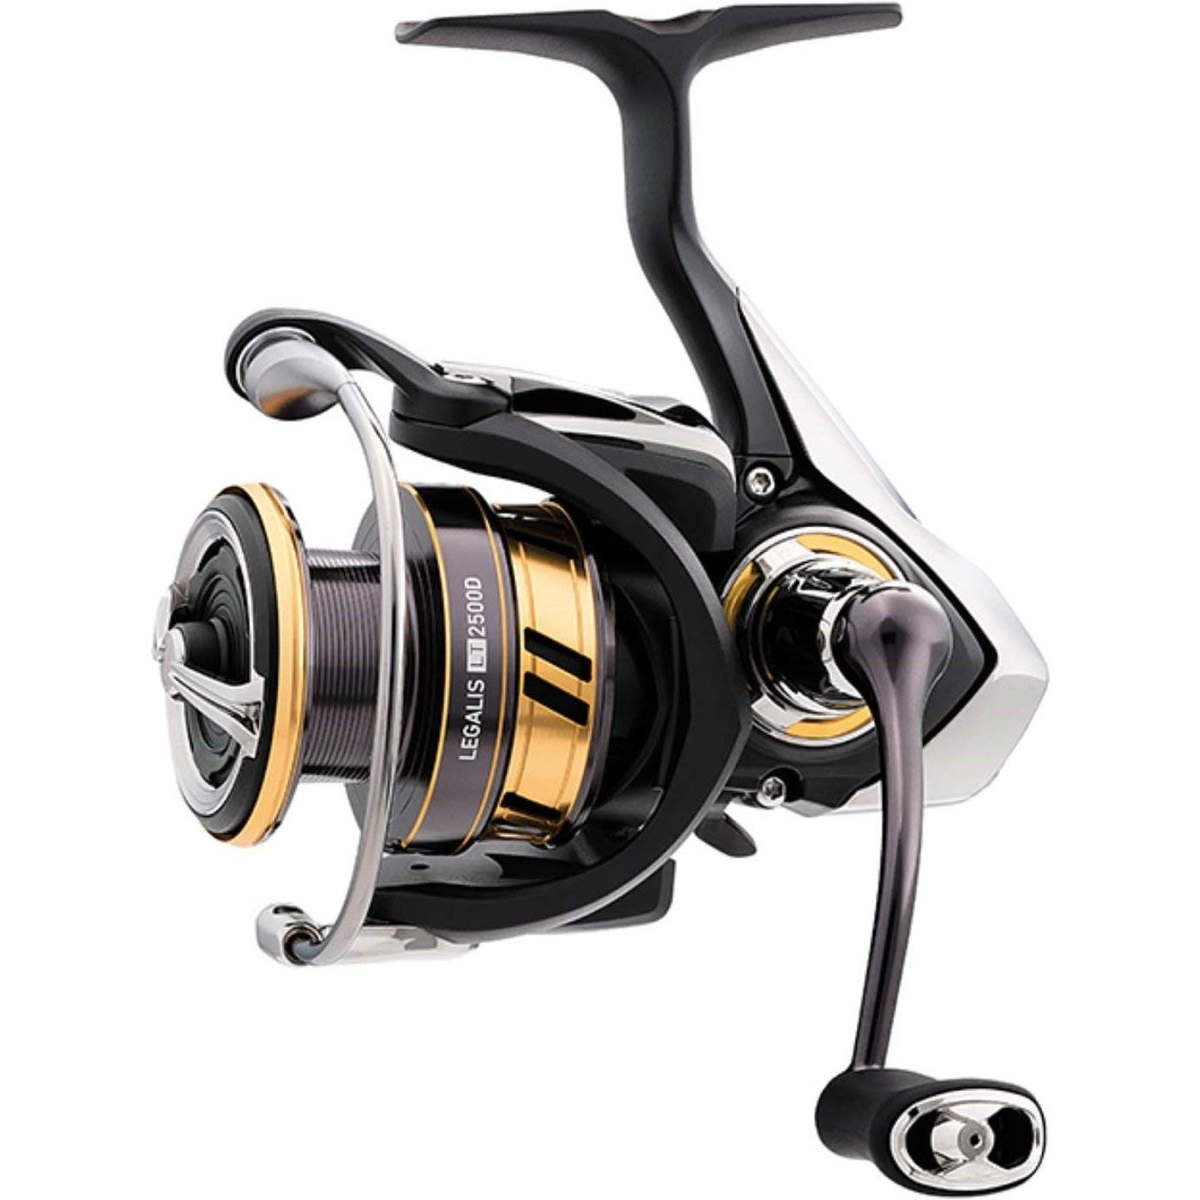 Photo of Daiwa Legalis LT Spinning Reel for sale at United Tackle Shops.